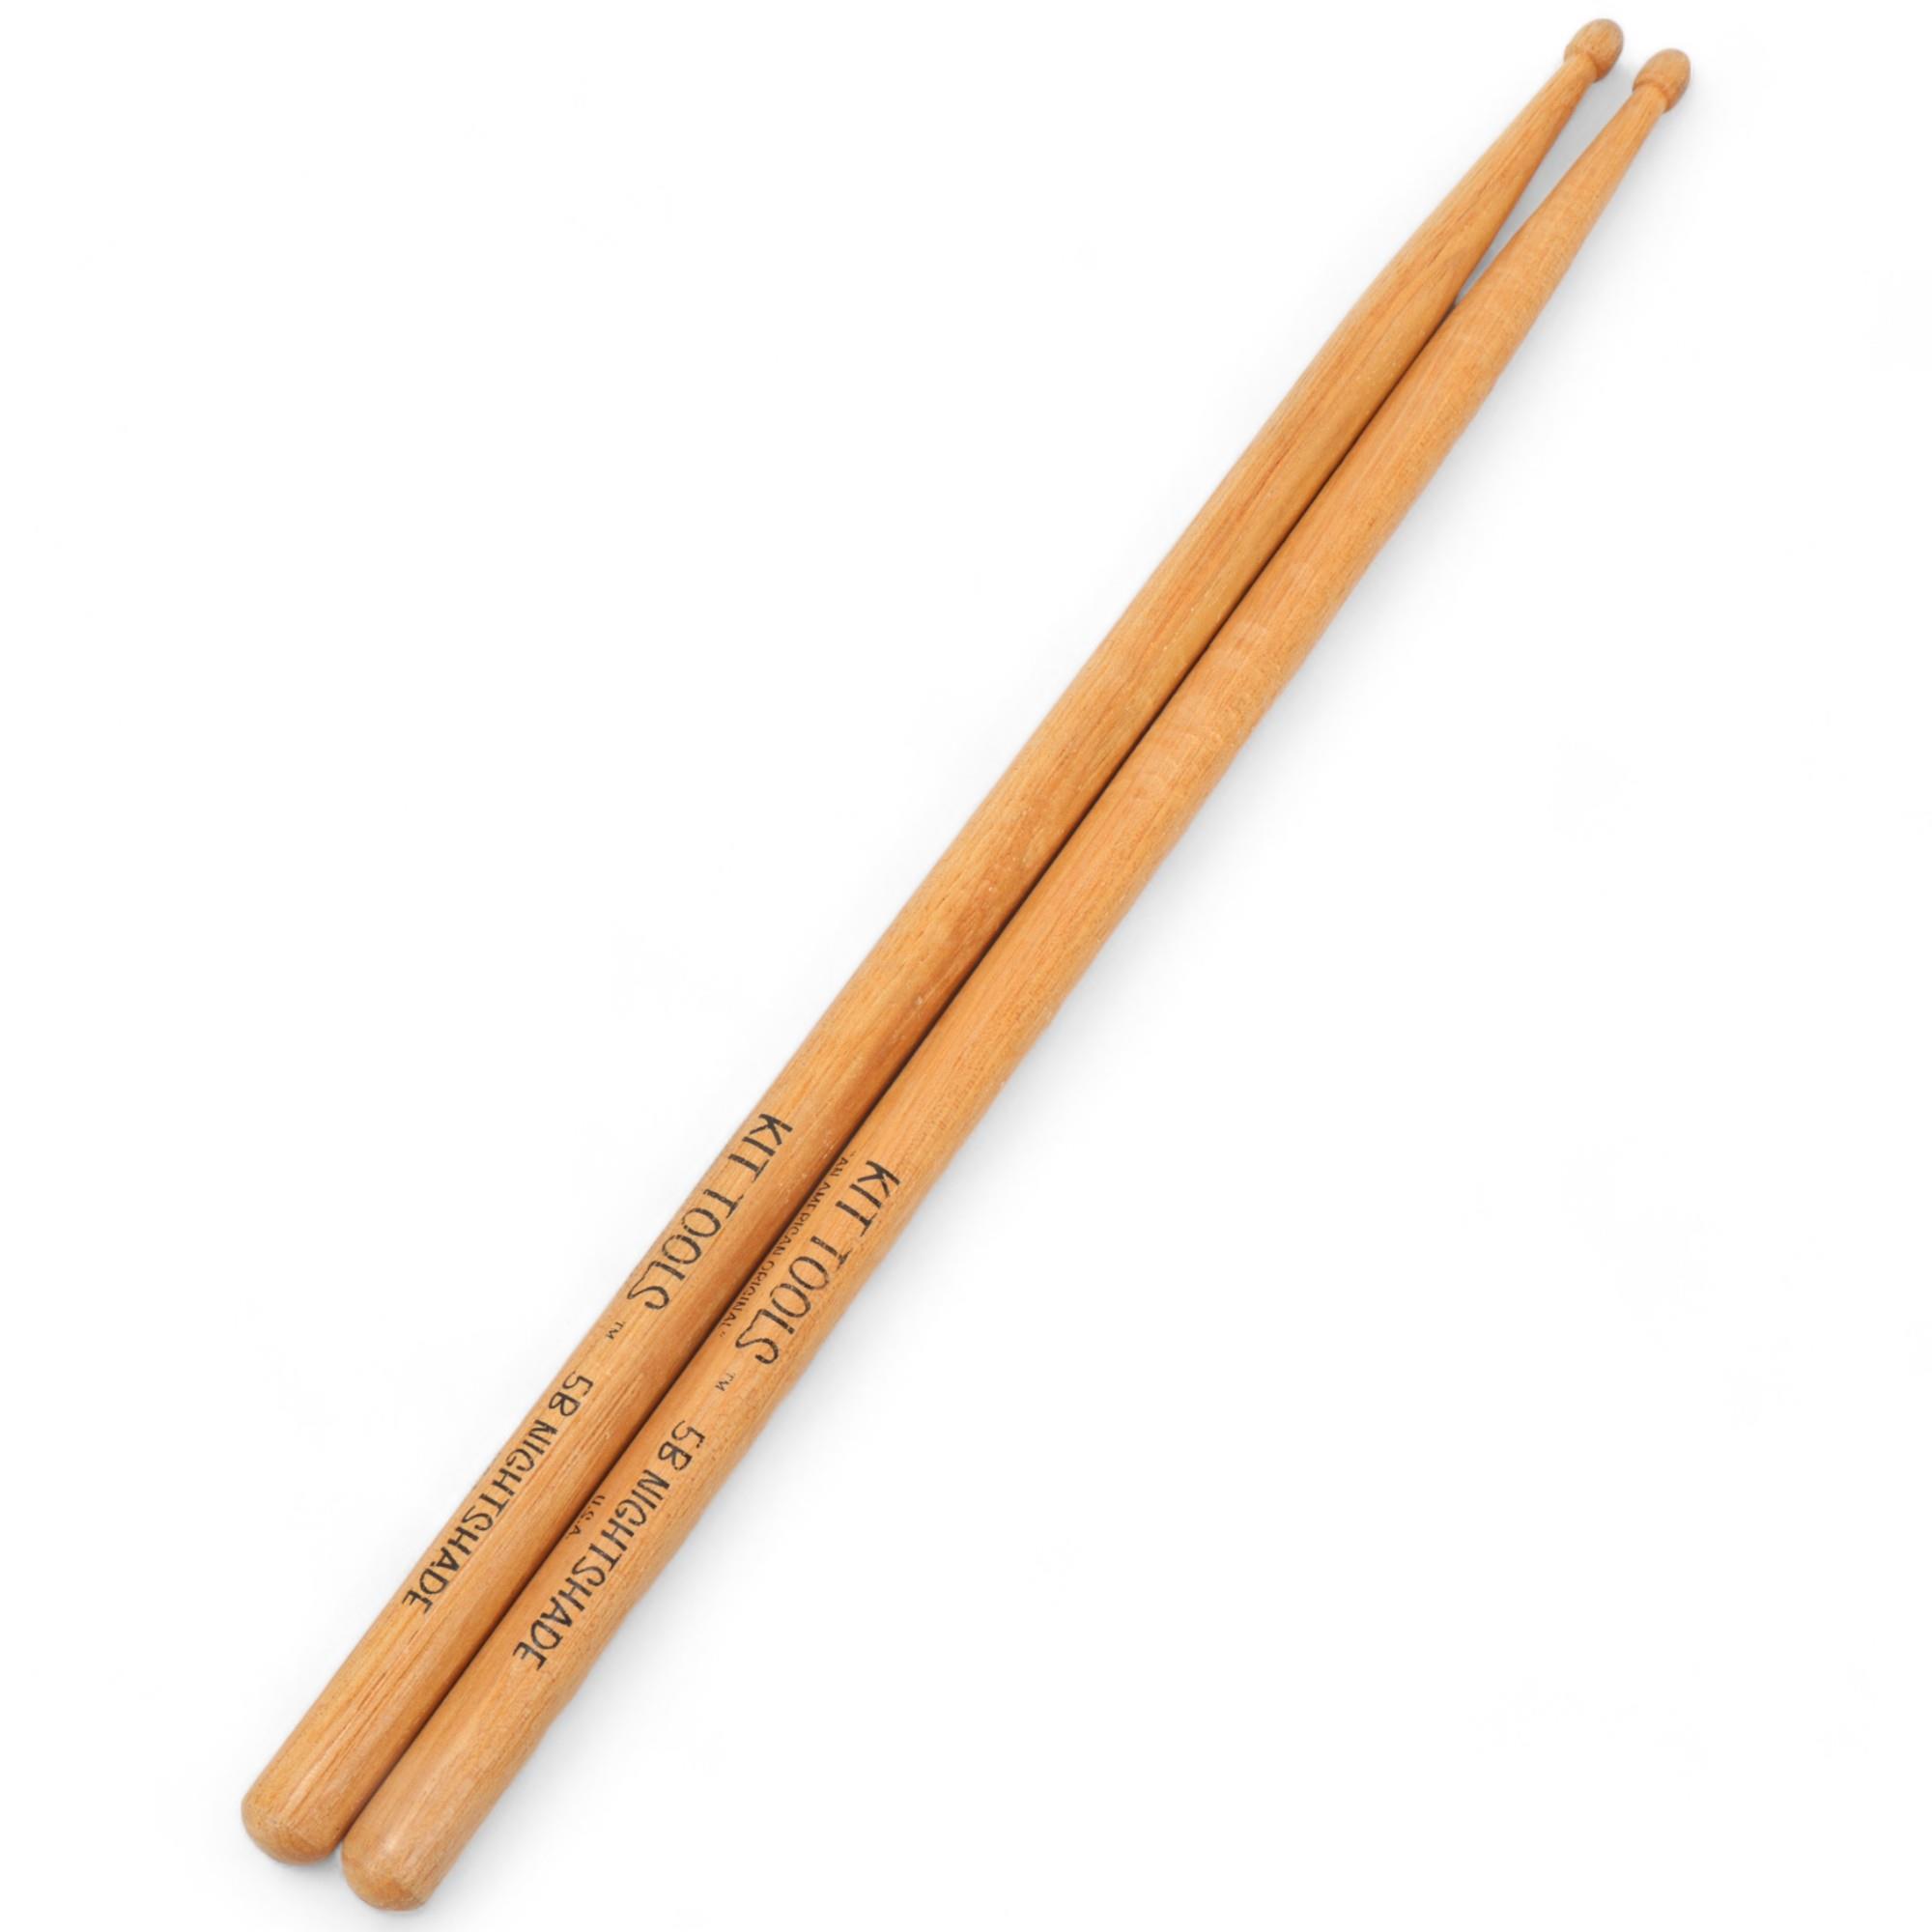 Two USED KIT TOOLS 'B NIGHTSHADE' Hickory DRUMSTICKS belonging to MITCH MITCHELL.